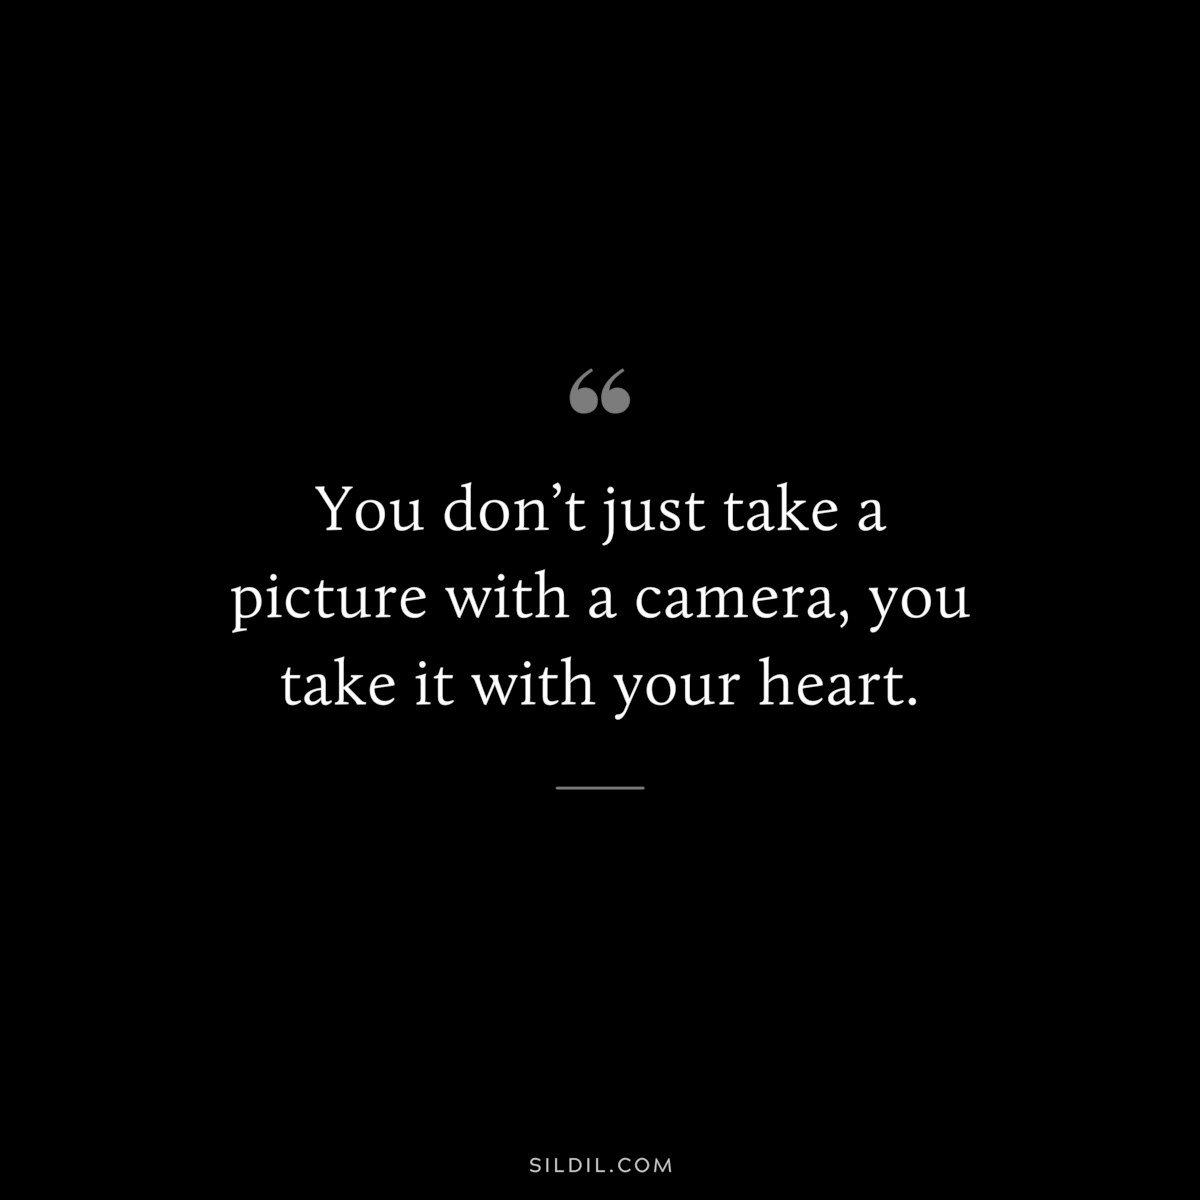 You don’t just take a picture with a camera, you take it with your heart.